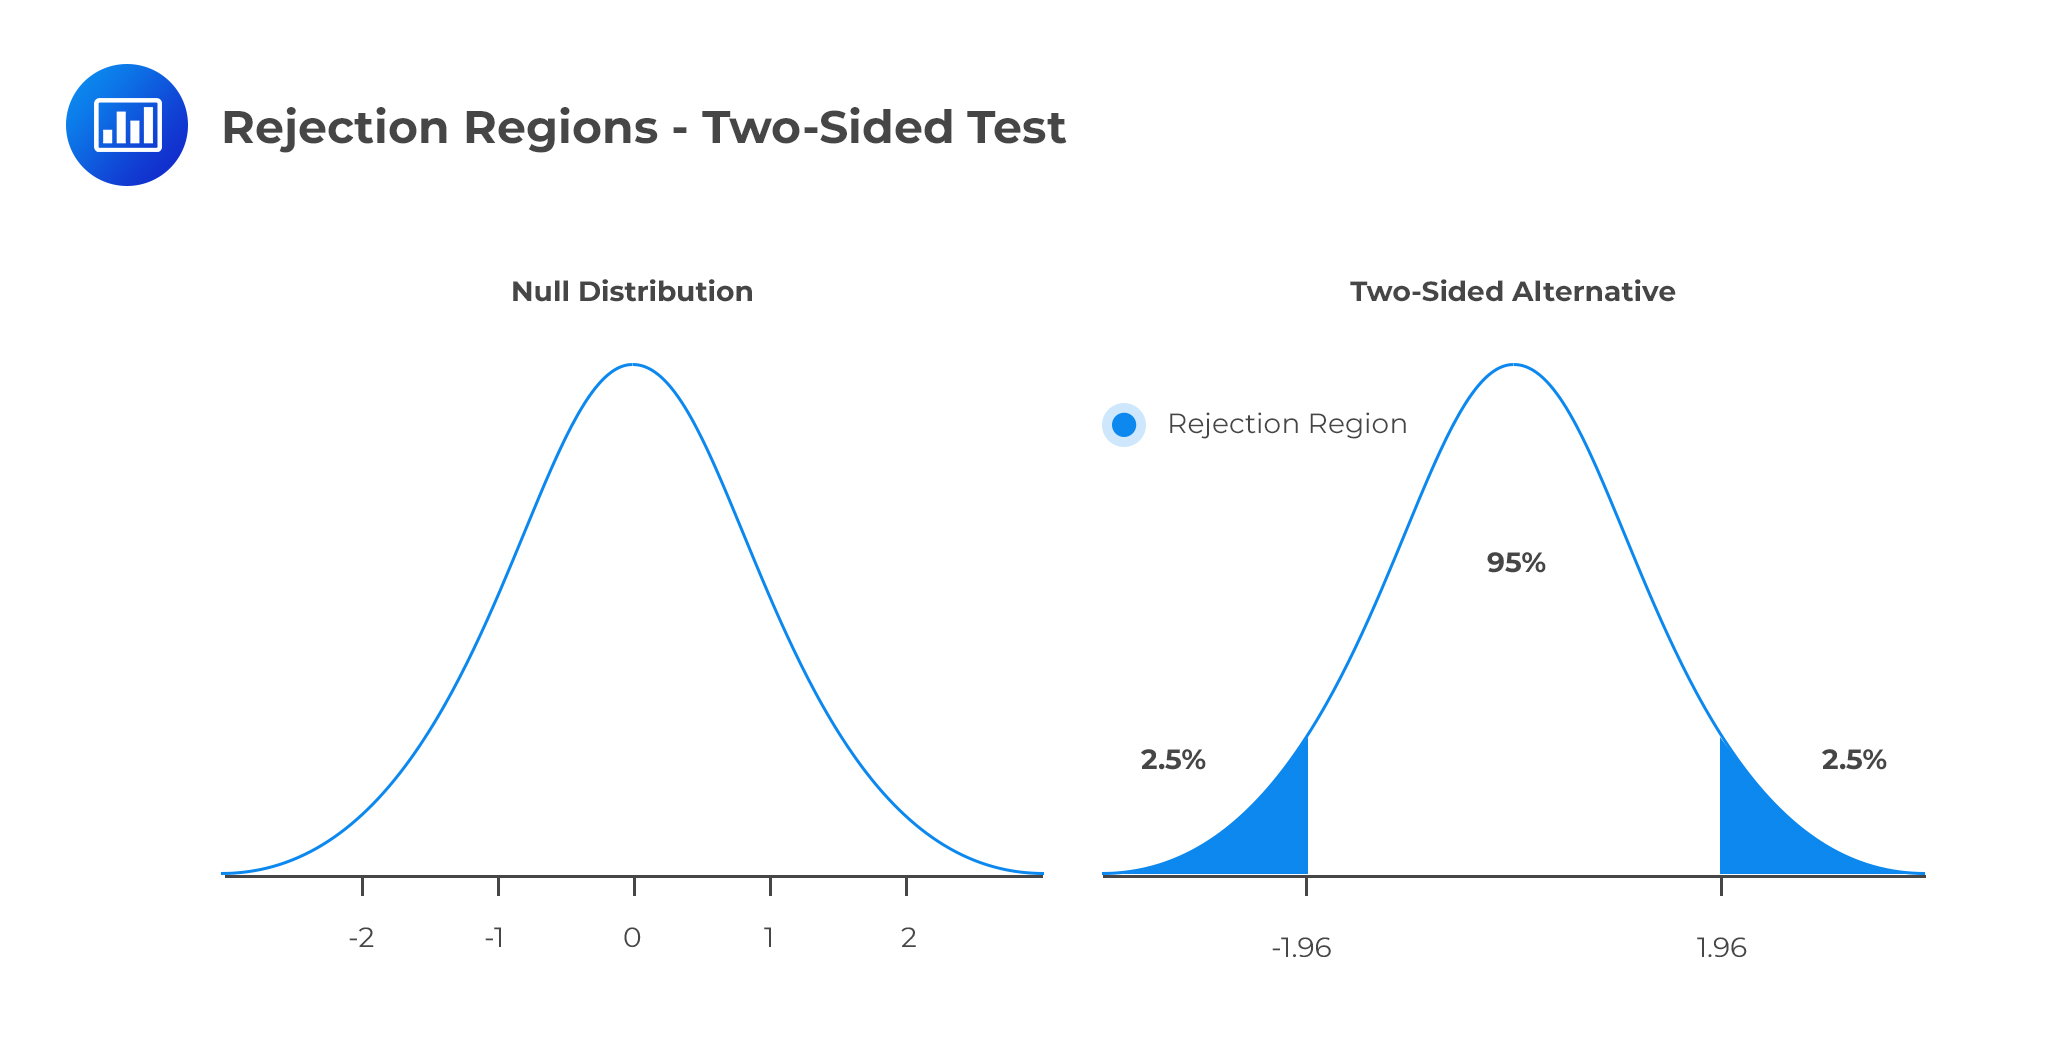 Rejection Regions - Two-Sided Test